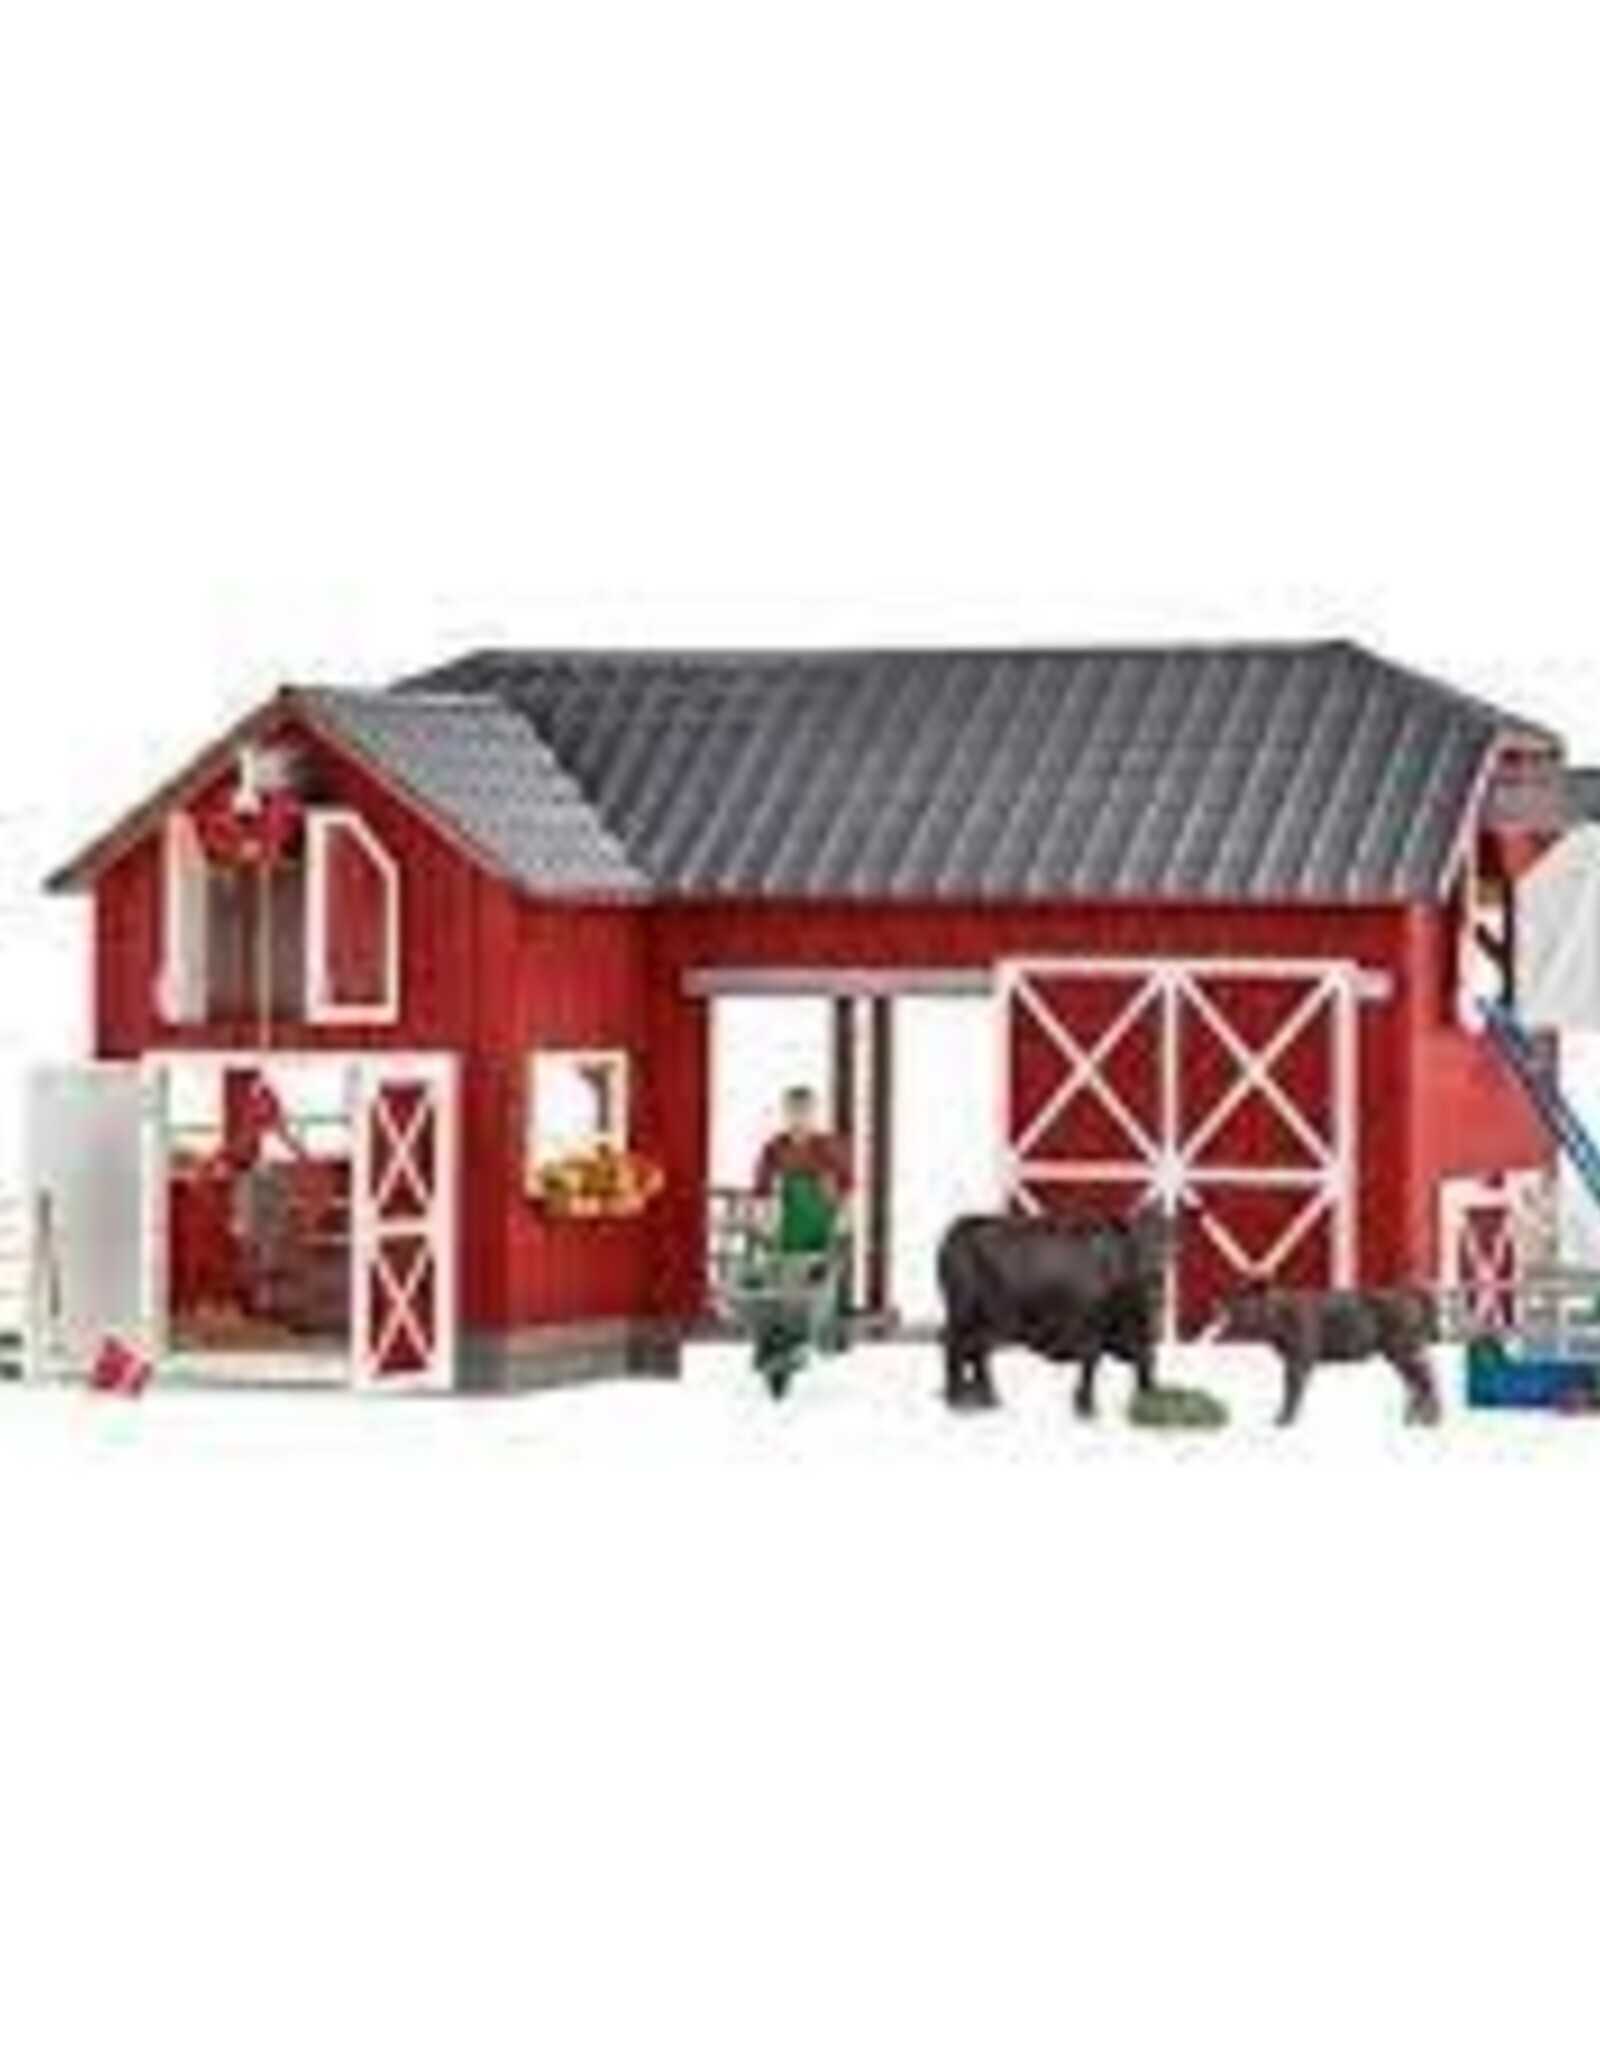 SCHLEICH Large farm with Black Angus